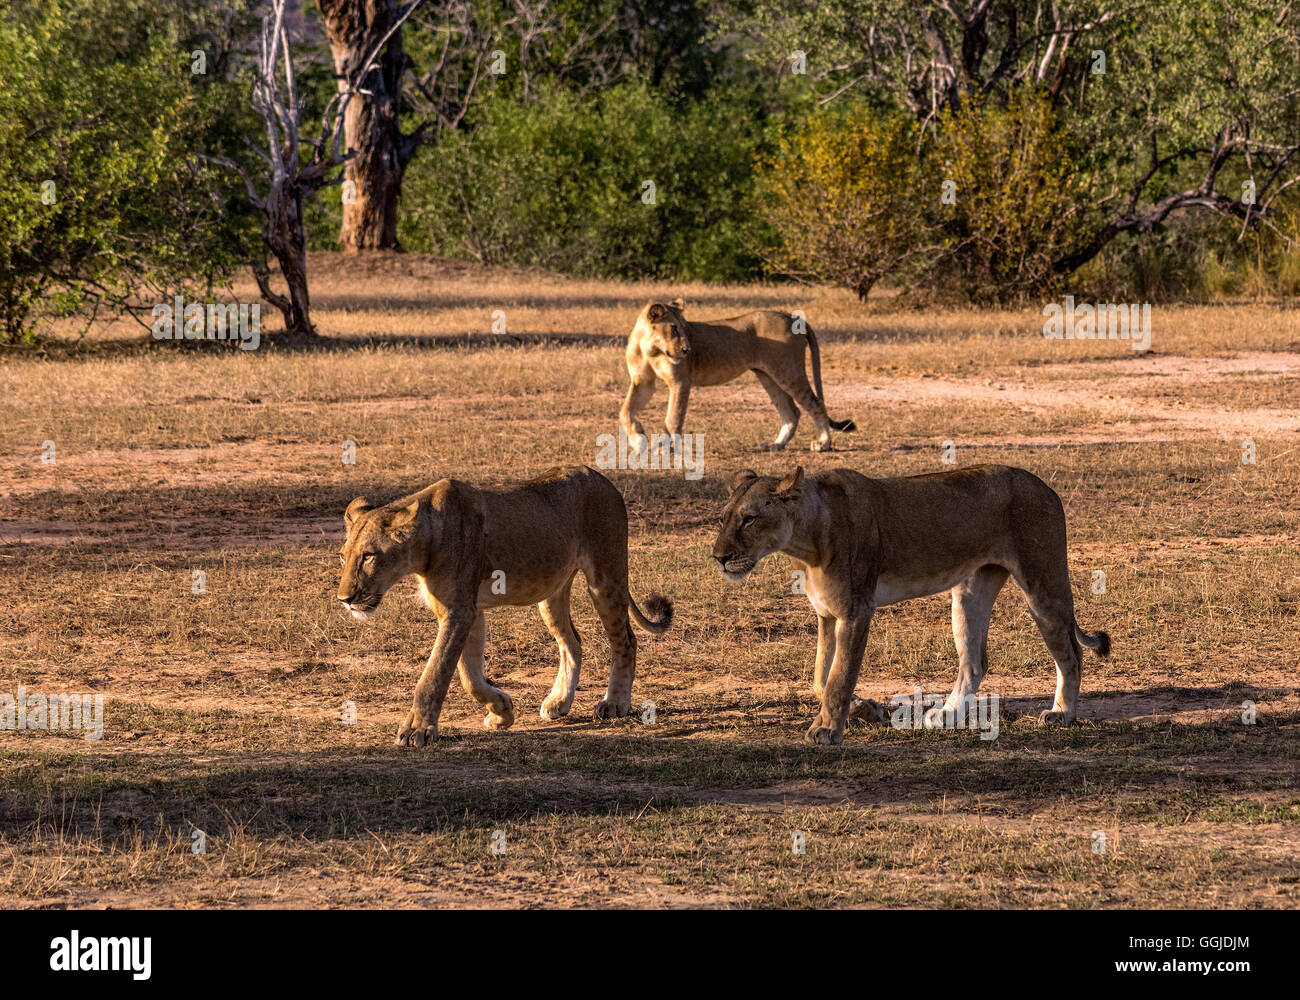 Lions hunting near Simbazi in The Selous Game Reserve of Tanzania Stock Photo